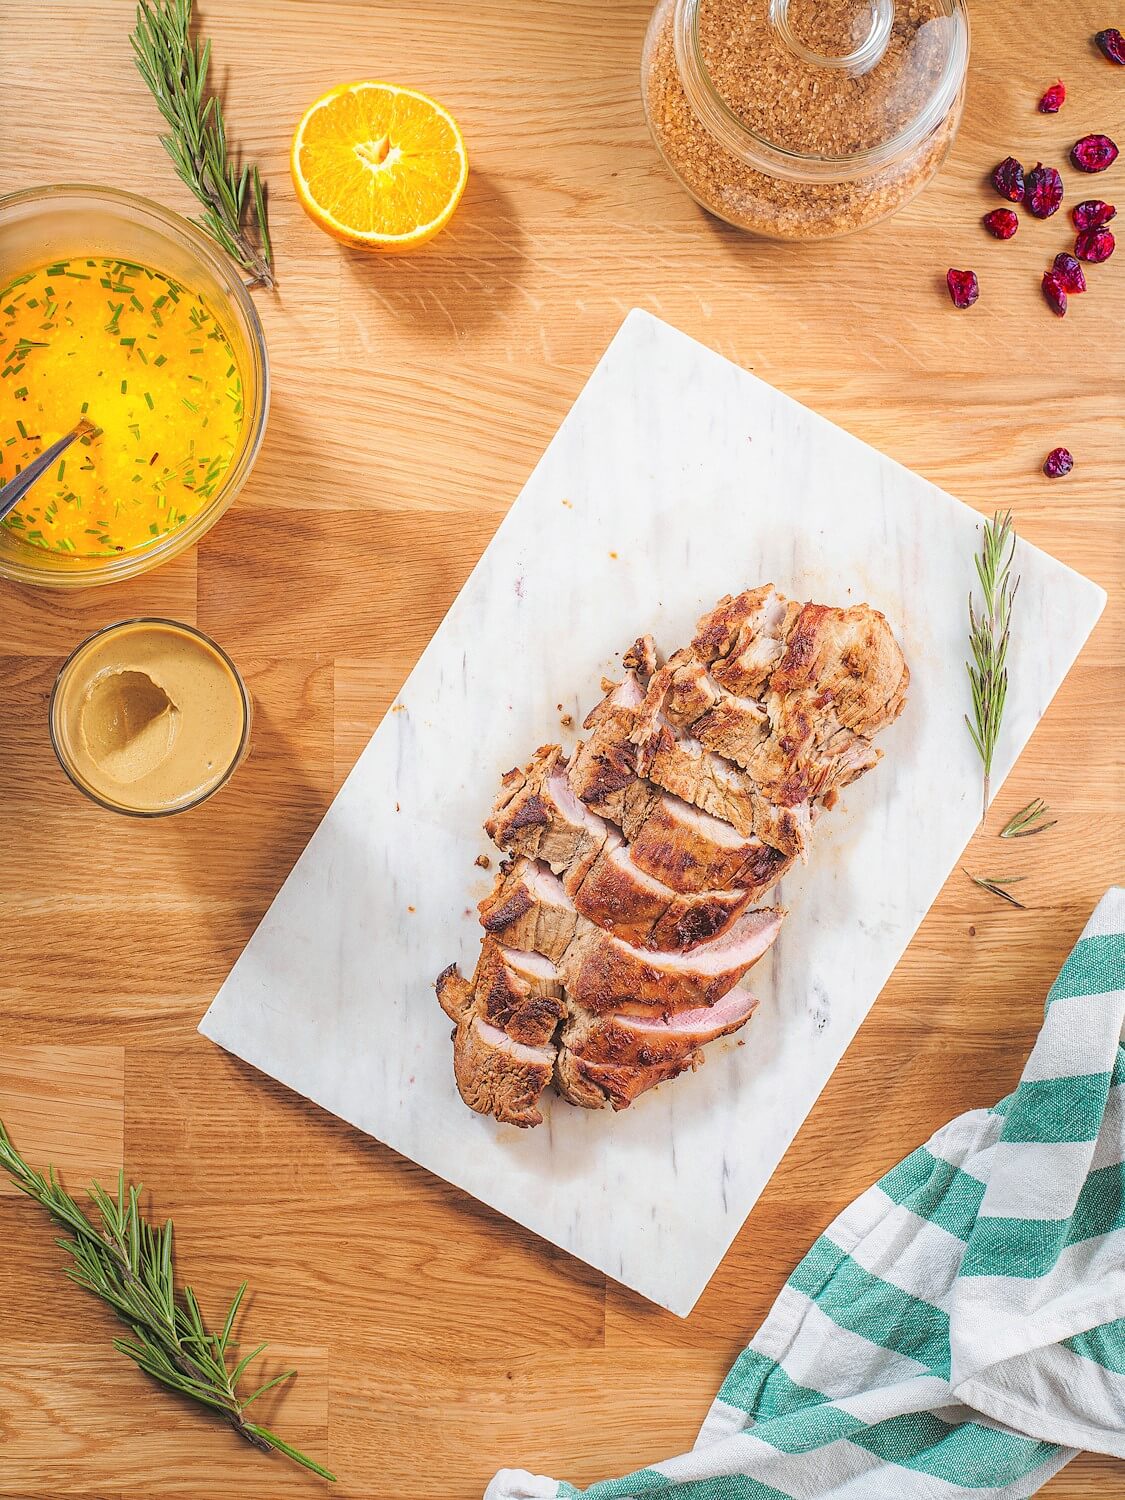 A quick and easy recipe for delicious Cranberry Orange Pork Tenderloin that is sure to become a new favorite. It's the perfect holiday meal.